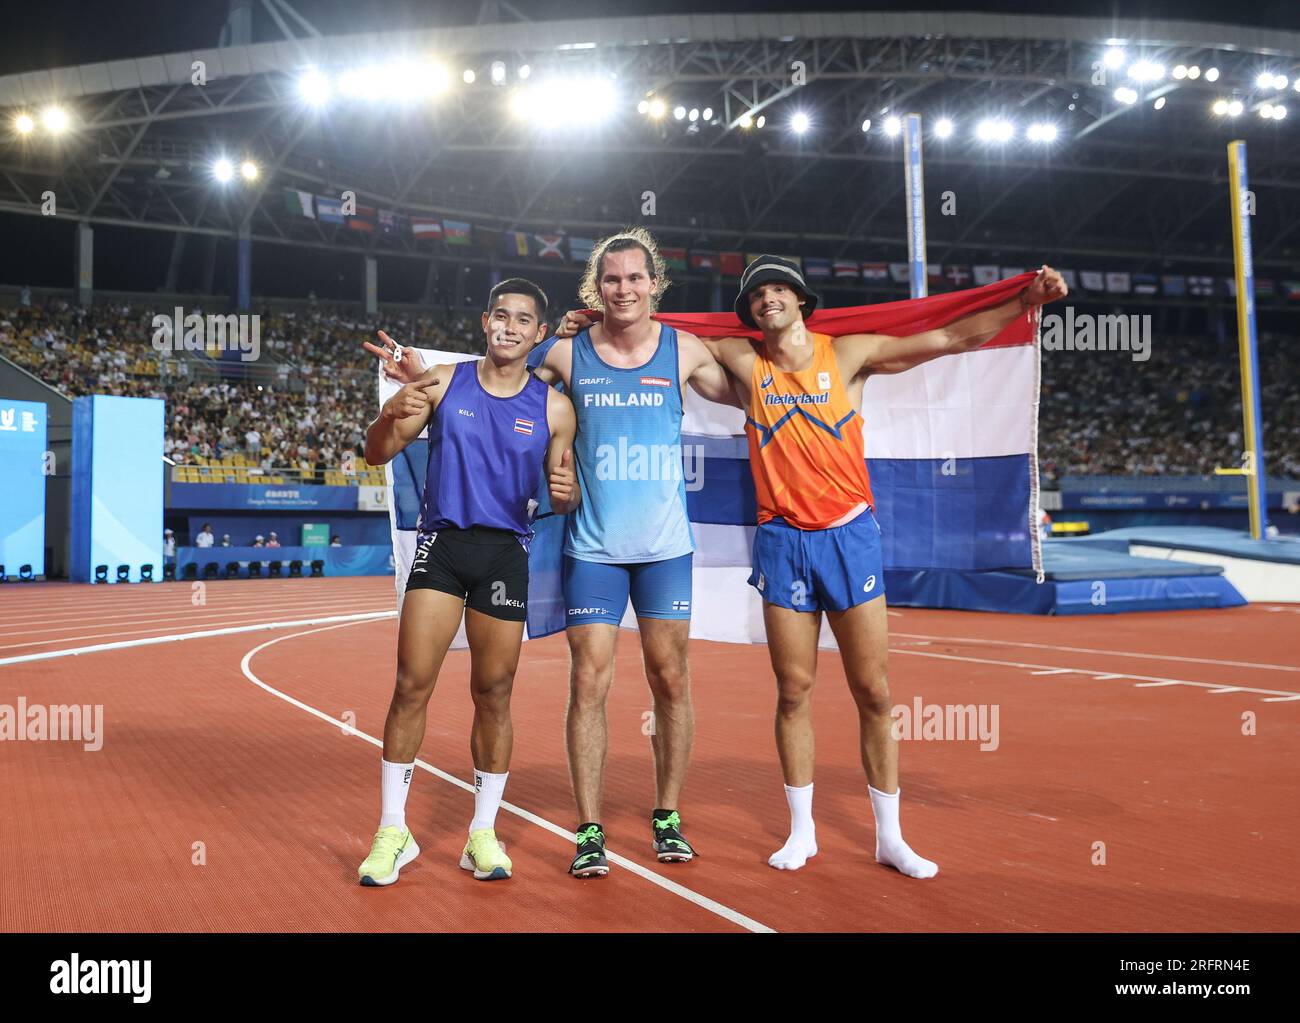 Chengdu, China's Sichuan Province. 5th Aug, 2023. Gold medalist Urho Vaino Johannes Kujanpaa (C) of Finland, silver medalist Patsapong Amsamarng (L) of Thailand and bronze medalist Koen Evan Van Der Wijst of the Netherlands celebrate after the athletics men's pole vault final at the 31st FISU Summer World University Games in Chengdu, southwest China's Sichuan Province, Aug. 5, 2023. Credit: Li Jing/Xinhua/Alamy Live News Stock Photo